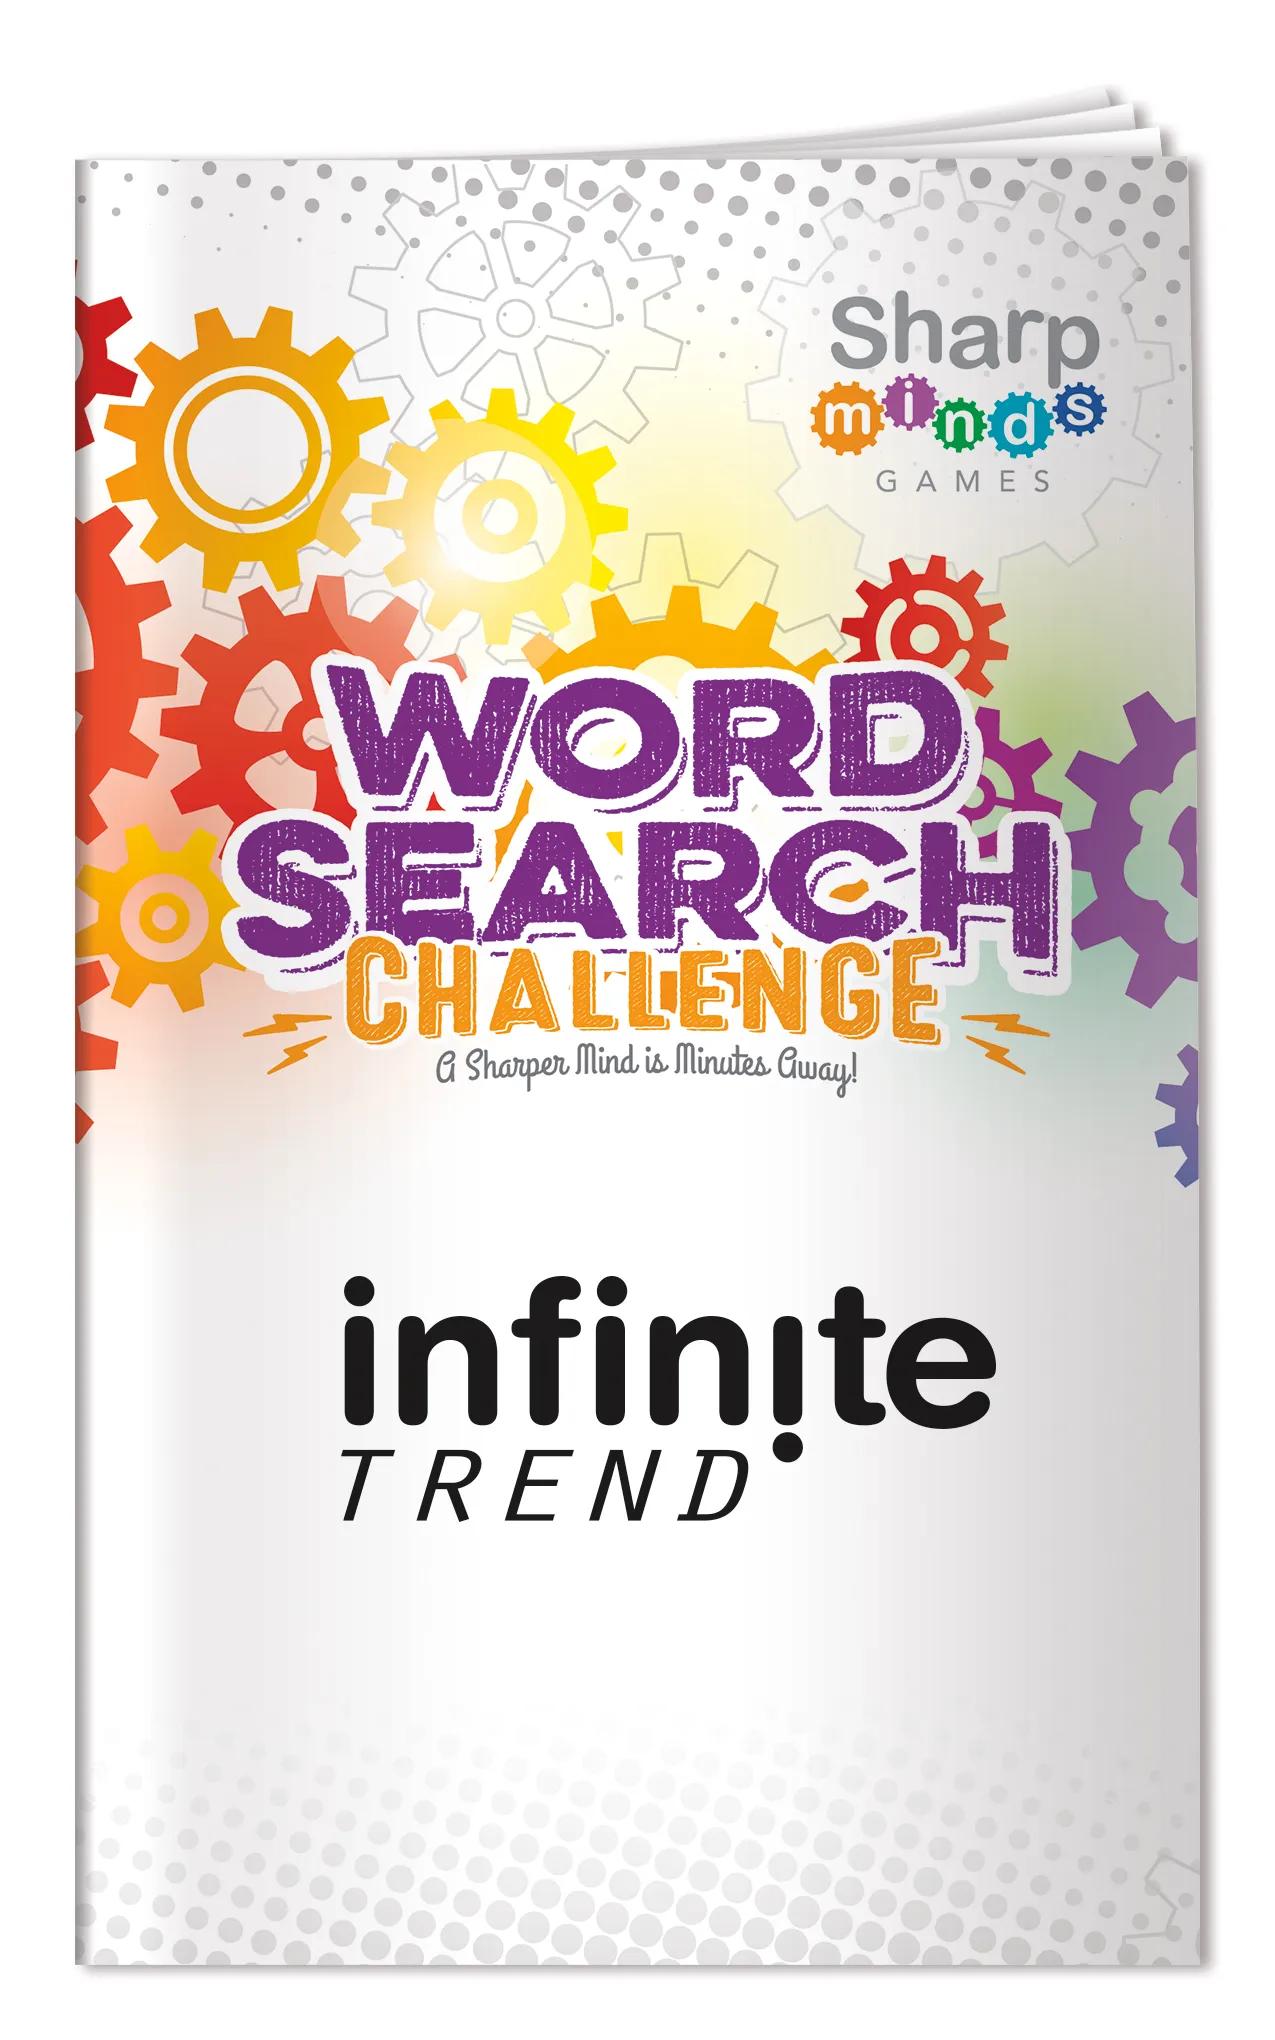 Sharp Minds Games: Word Searches Challenge 5 of 8